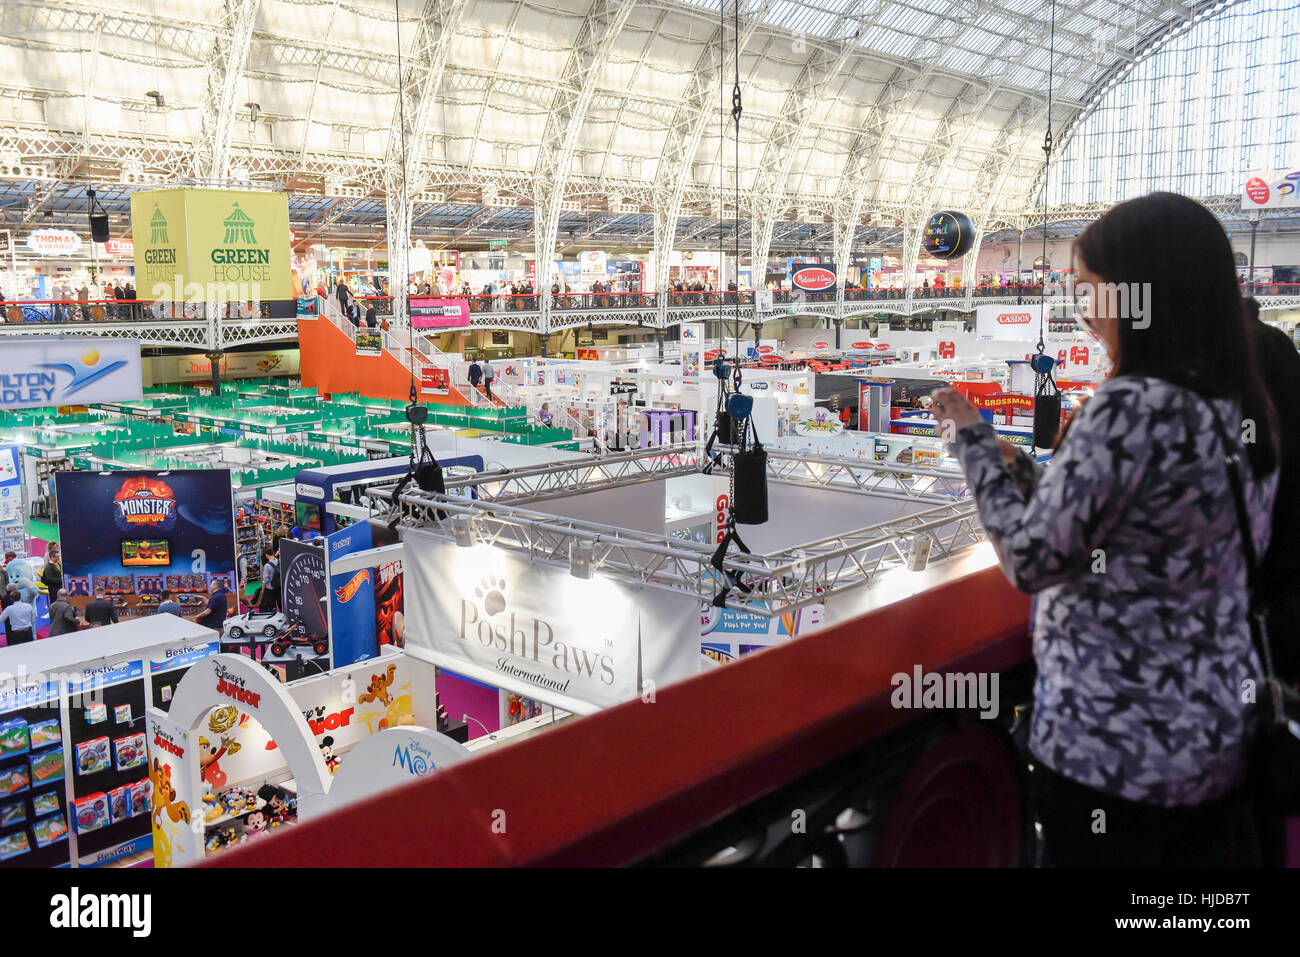 London, UK. 24th Jan, 2017. A vistor looks down at the stands at the opening day of the Toy Fair 2017, taking place at Kensington Olympia. The trade show brings together many of the leading toy manufacturers and distributors and offers a chance for buyers to see the latest toys in preparation for Christmas. Credit: Stephen Chung/Alamy Live News Stock Photo